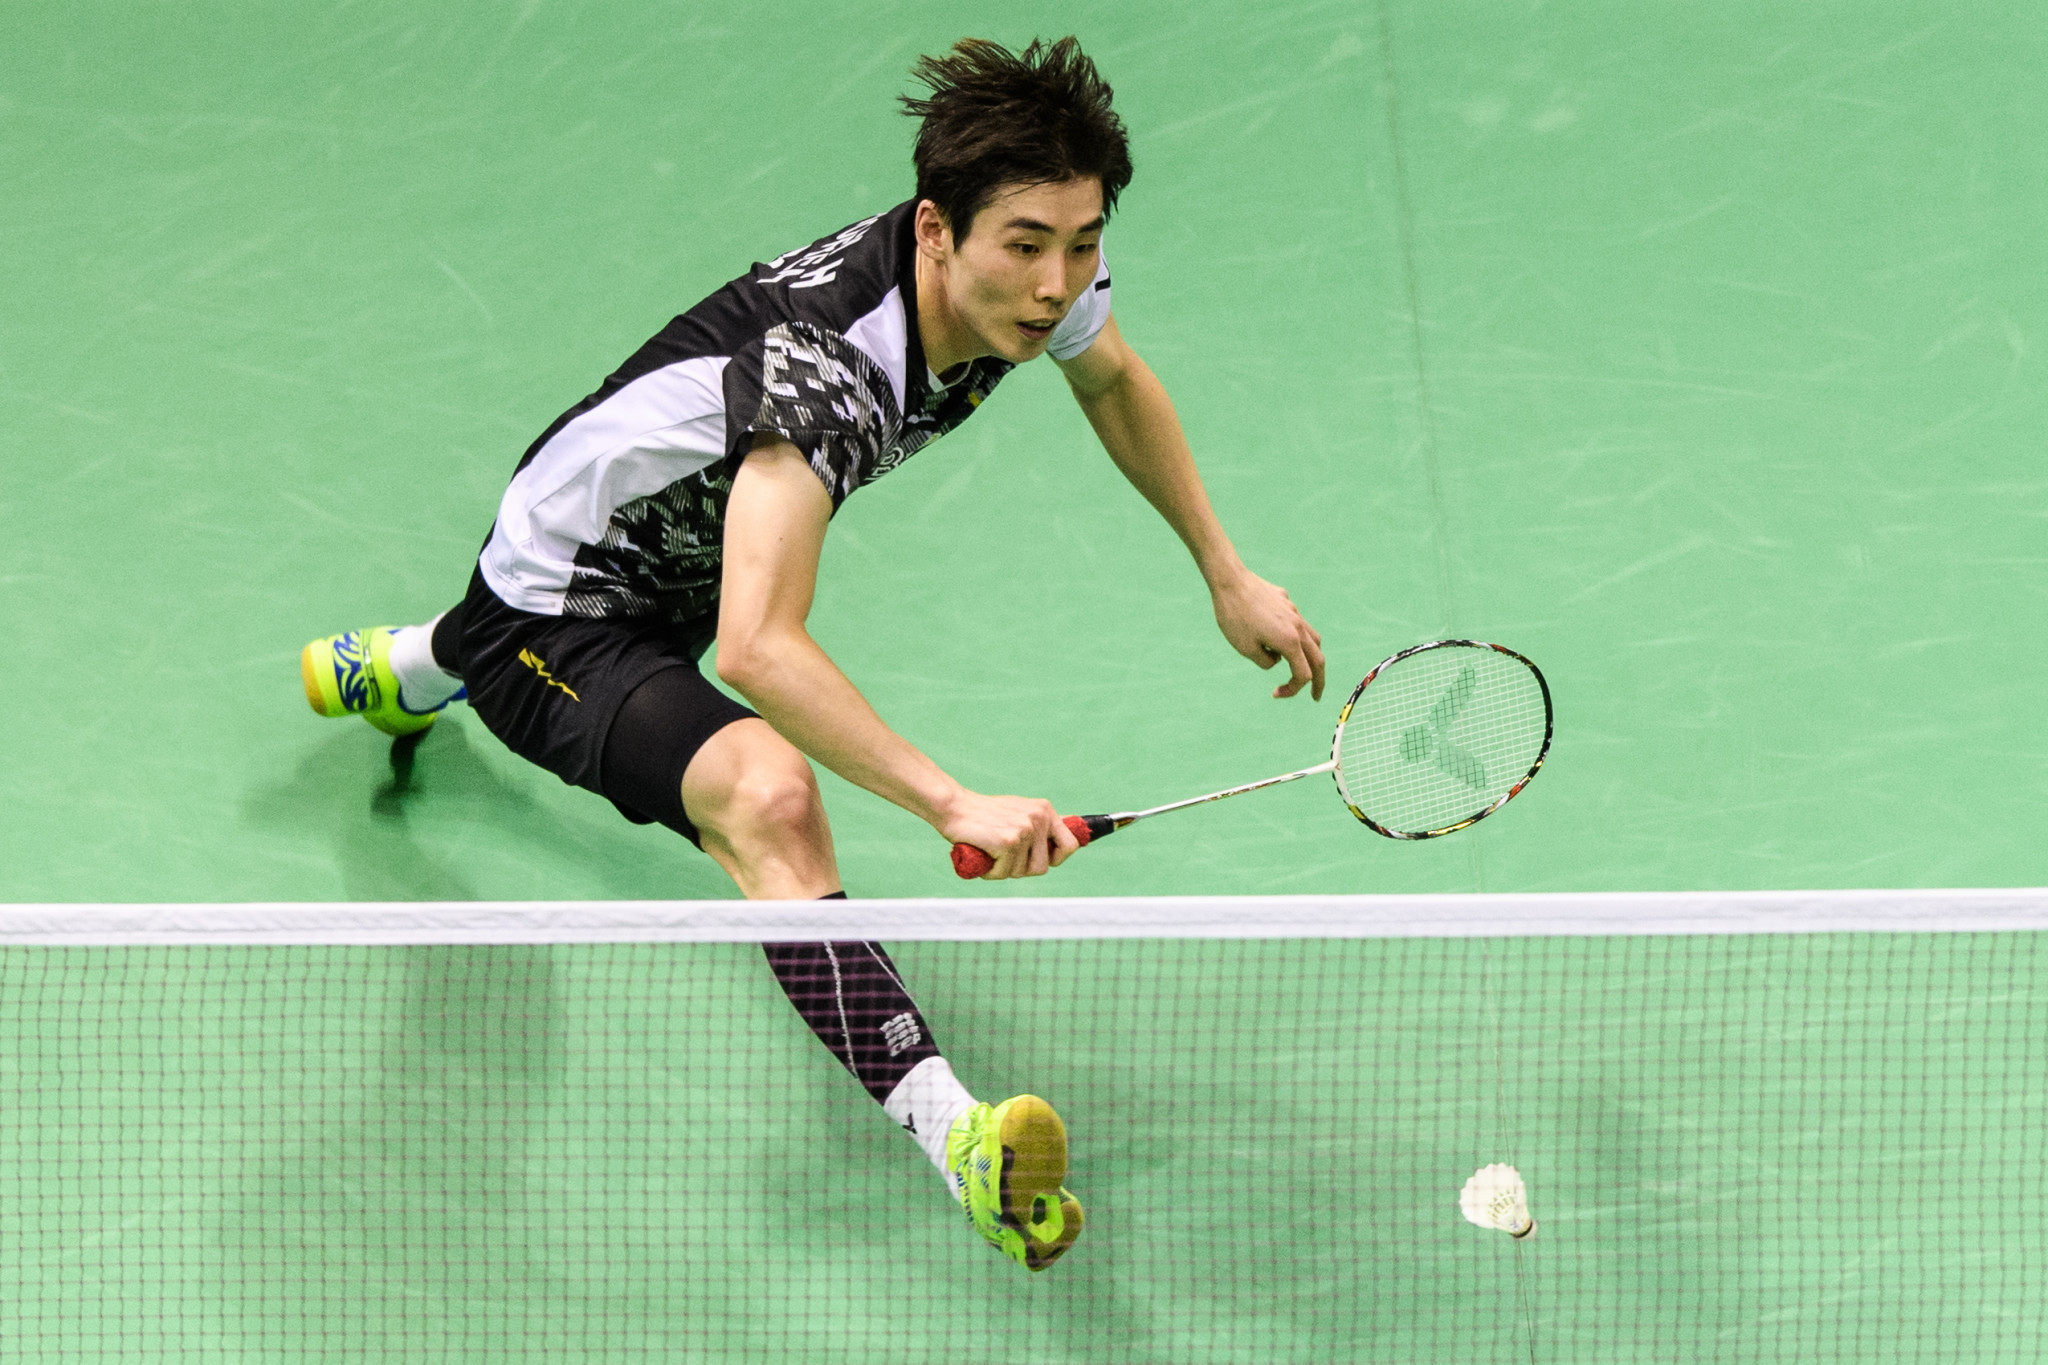 Home favourite Son Wan Ho is seeded first for the Badminton World Federation Korea Masters in Gwangju ©Getty Images